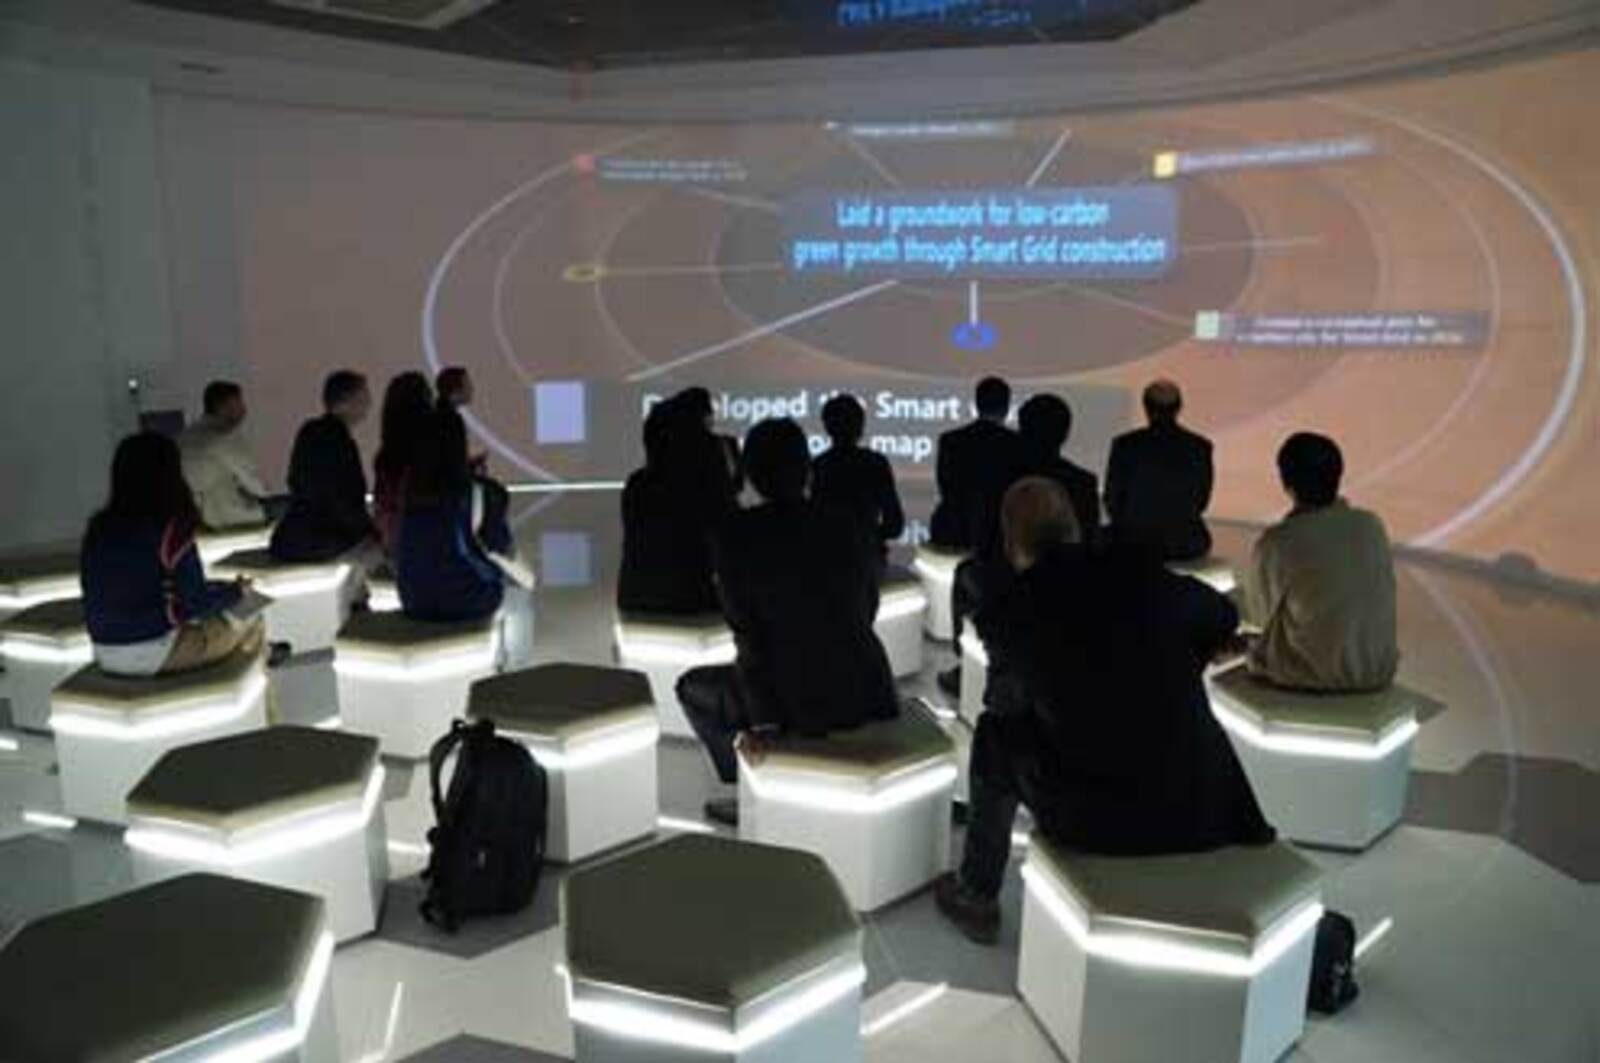 The study tour visited the Smart Grid Information Center and the Climate Change Exhibit Hall in Jeju Island which provided impressive displays of modern emissions reducing technologies.